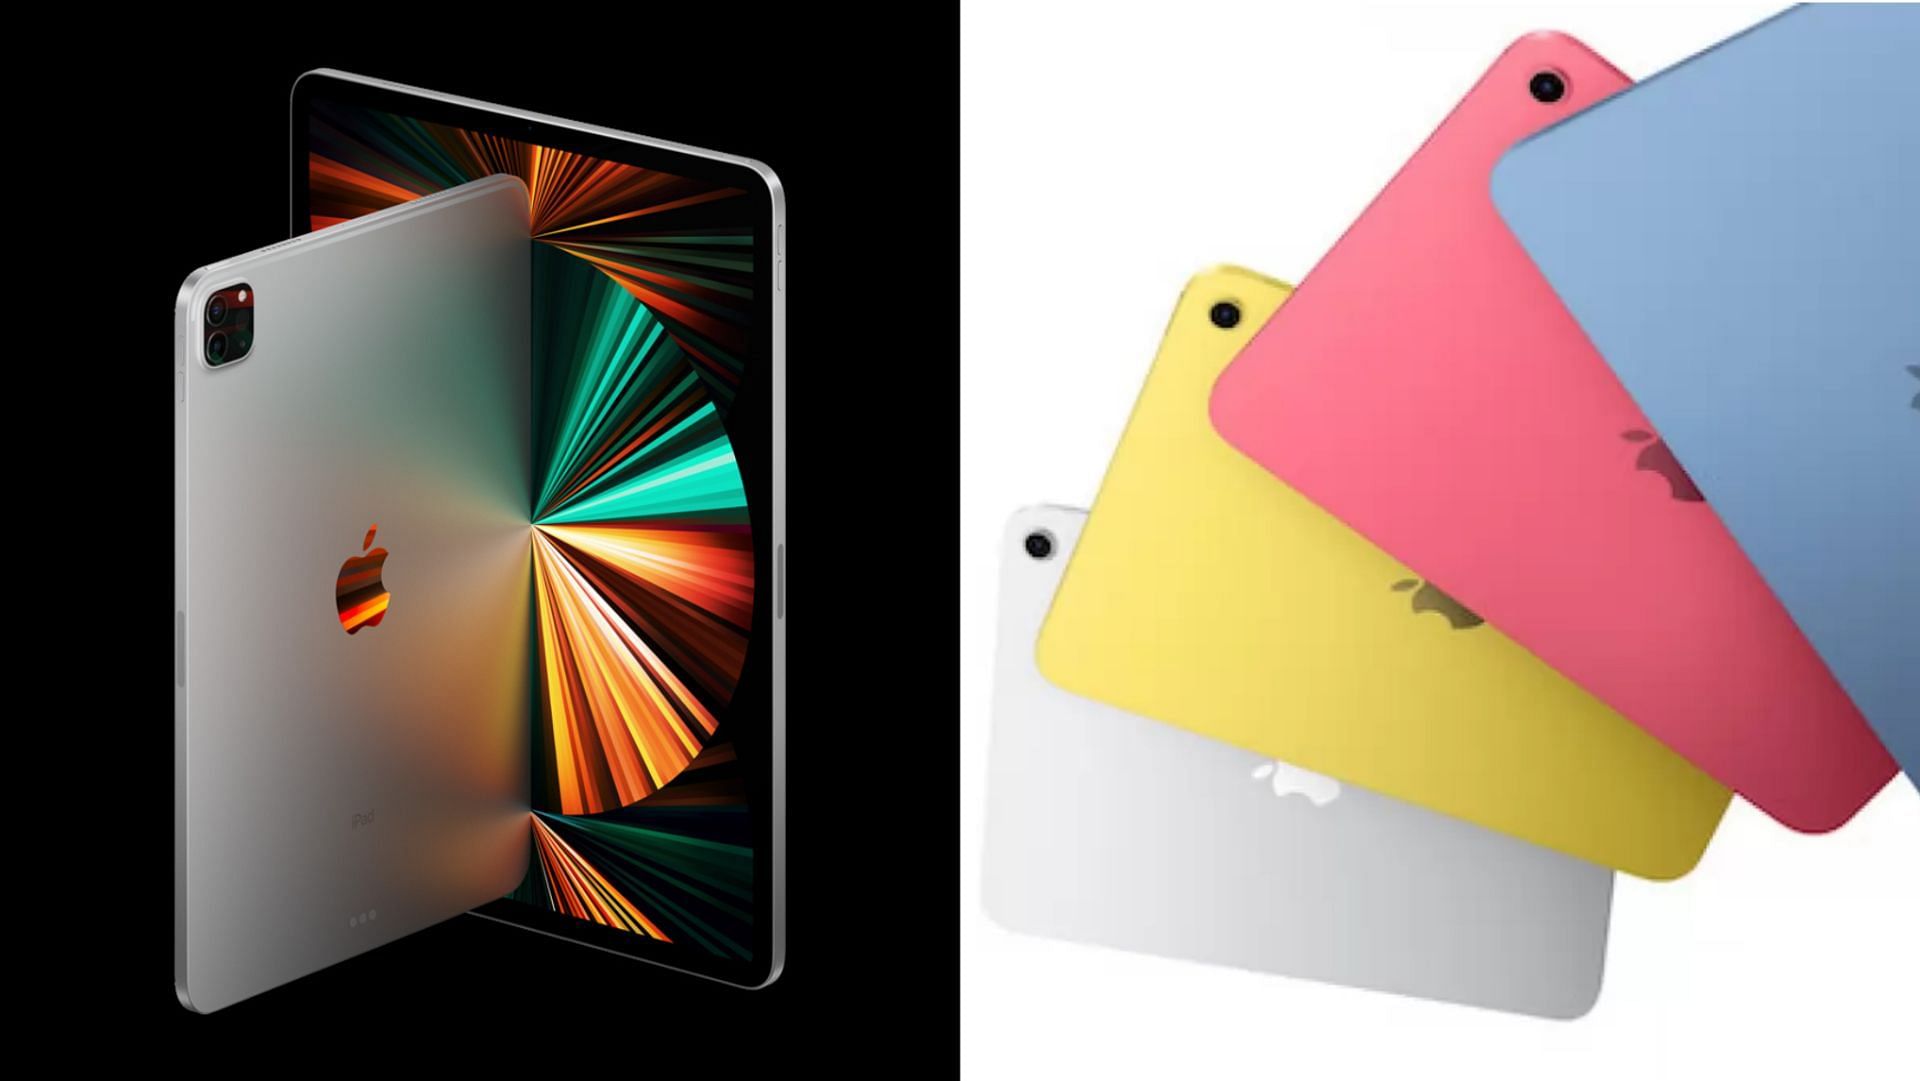 There are some amazing discounts on the iPad Pro model (Images via Apple)